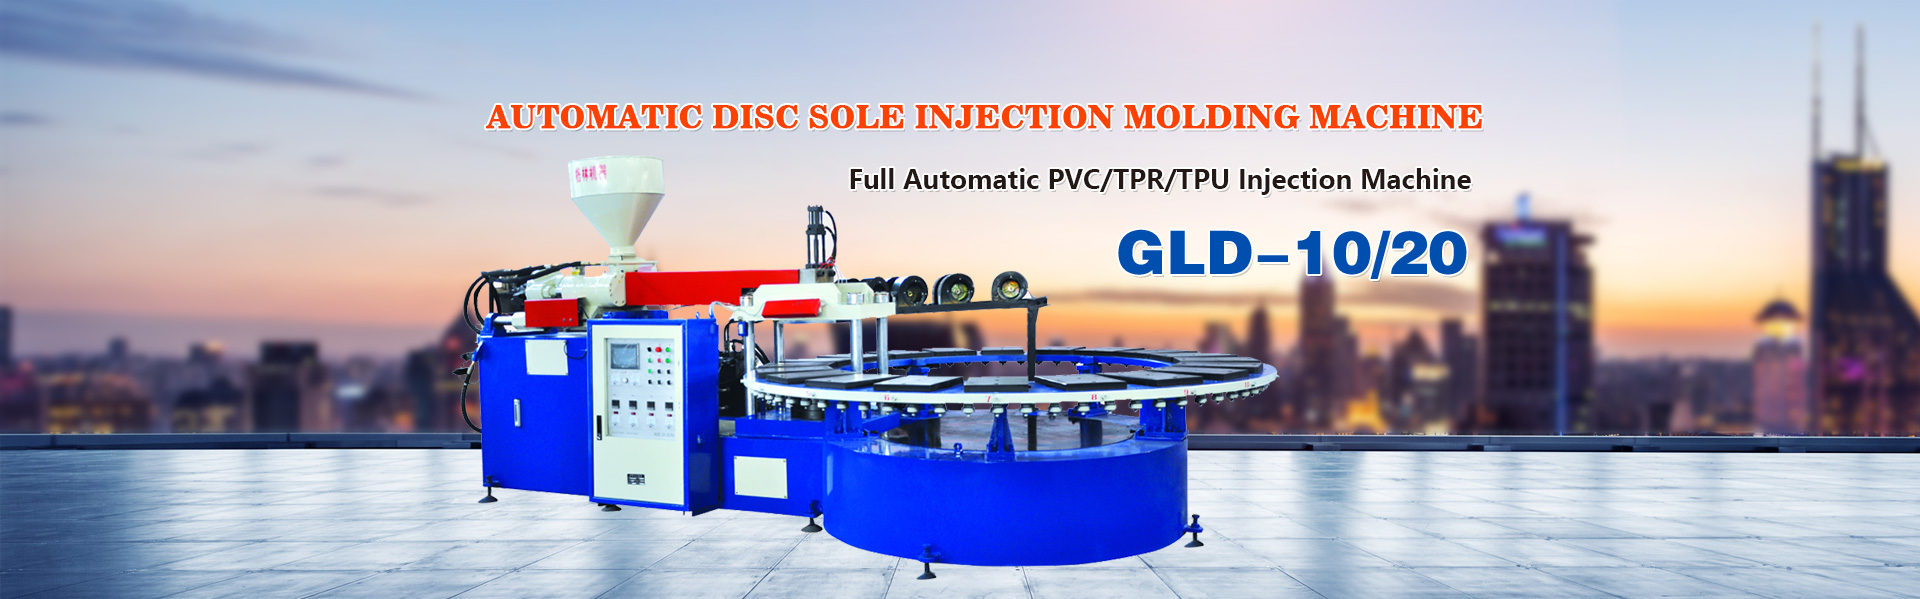 Automatic Disc Sole Injection Molding Machine